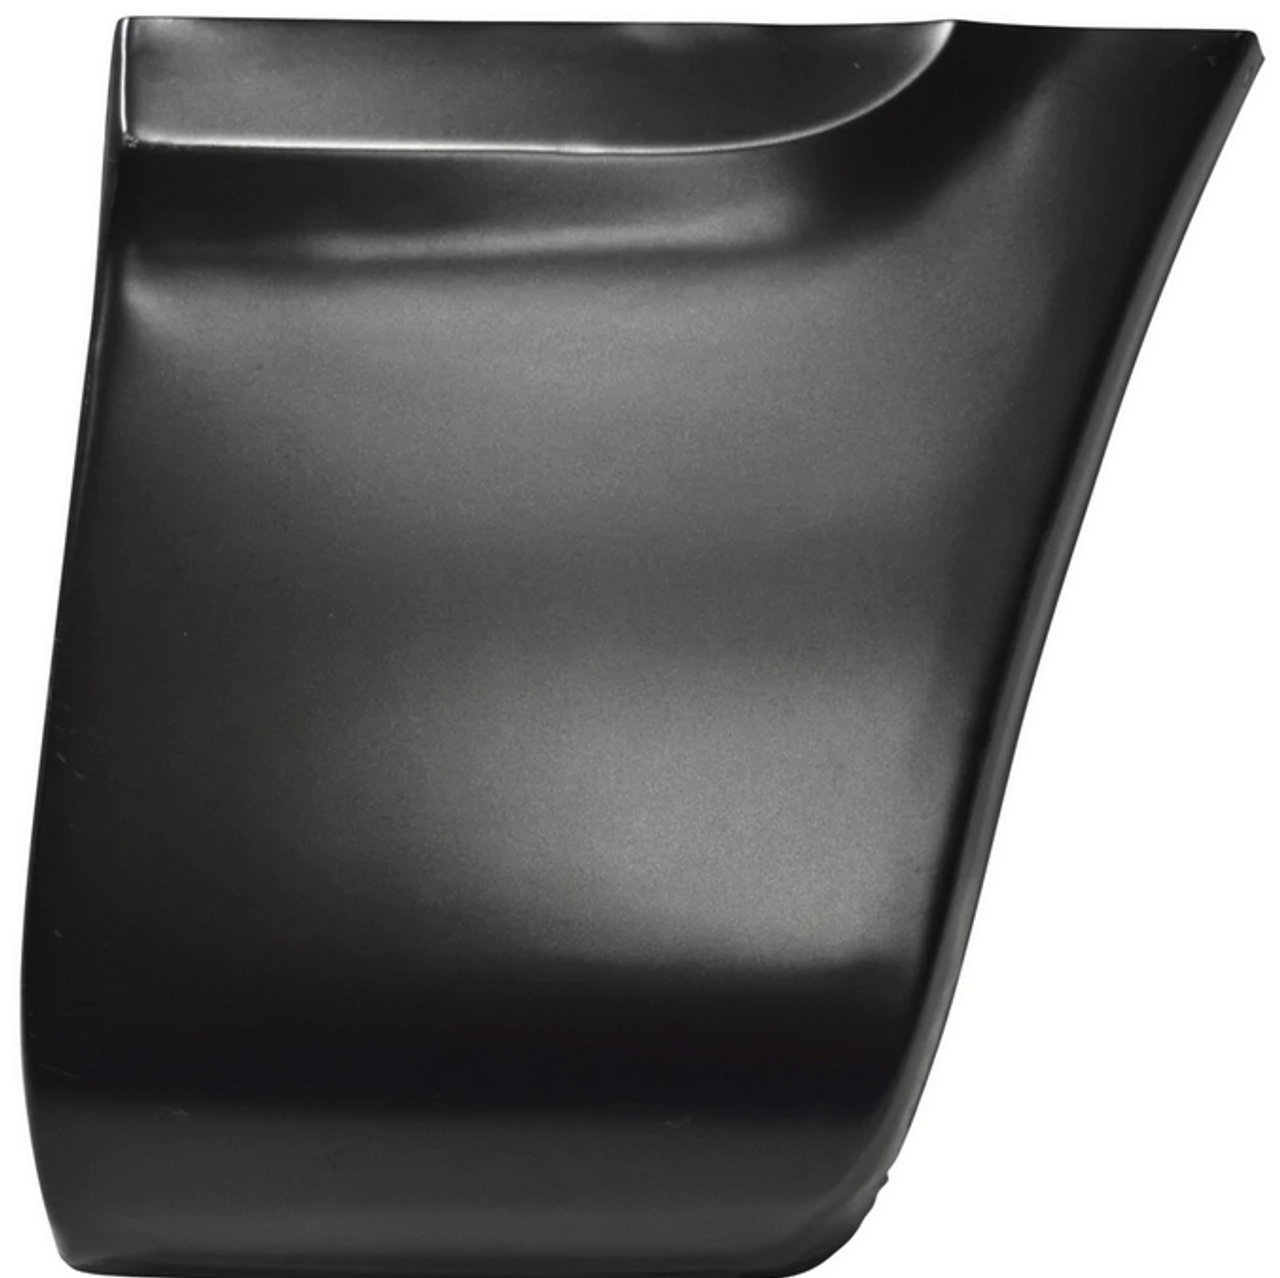 Lh & Rh - 1972-1993 Dodge Ram Front Fender-Lower Rear Sections (Sold As A Pair)